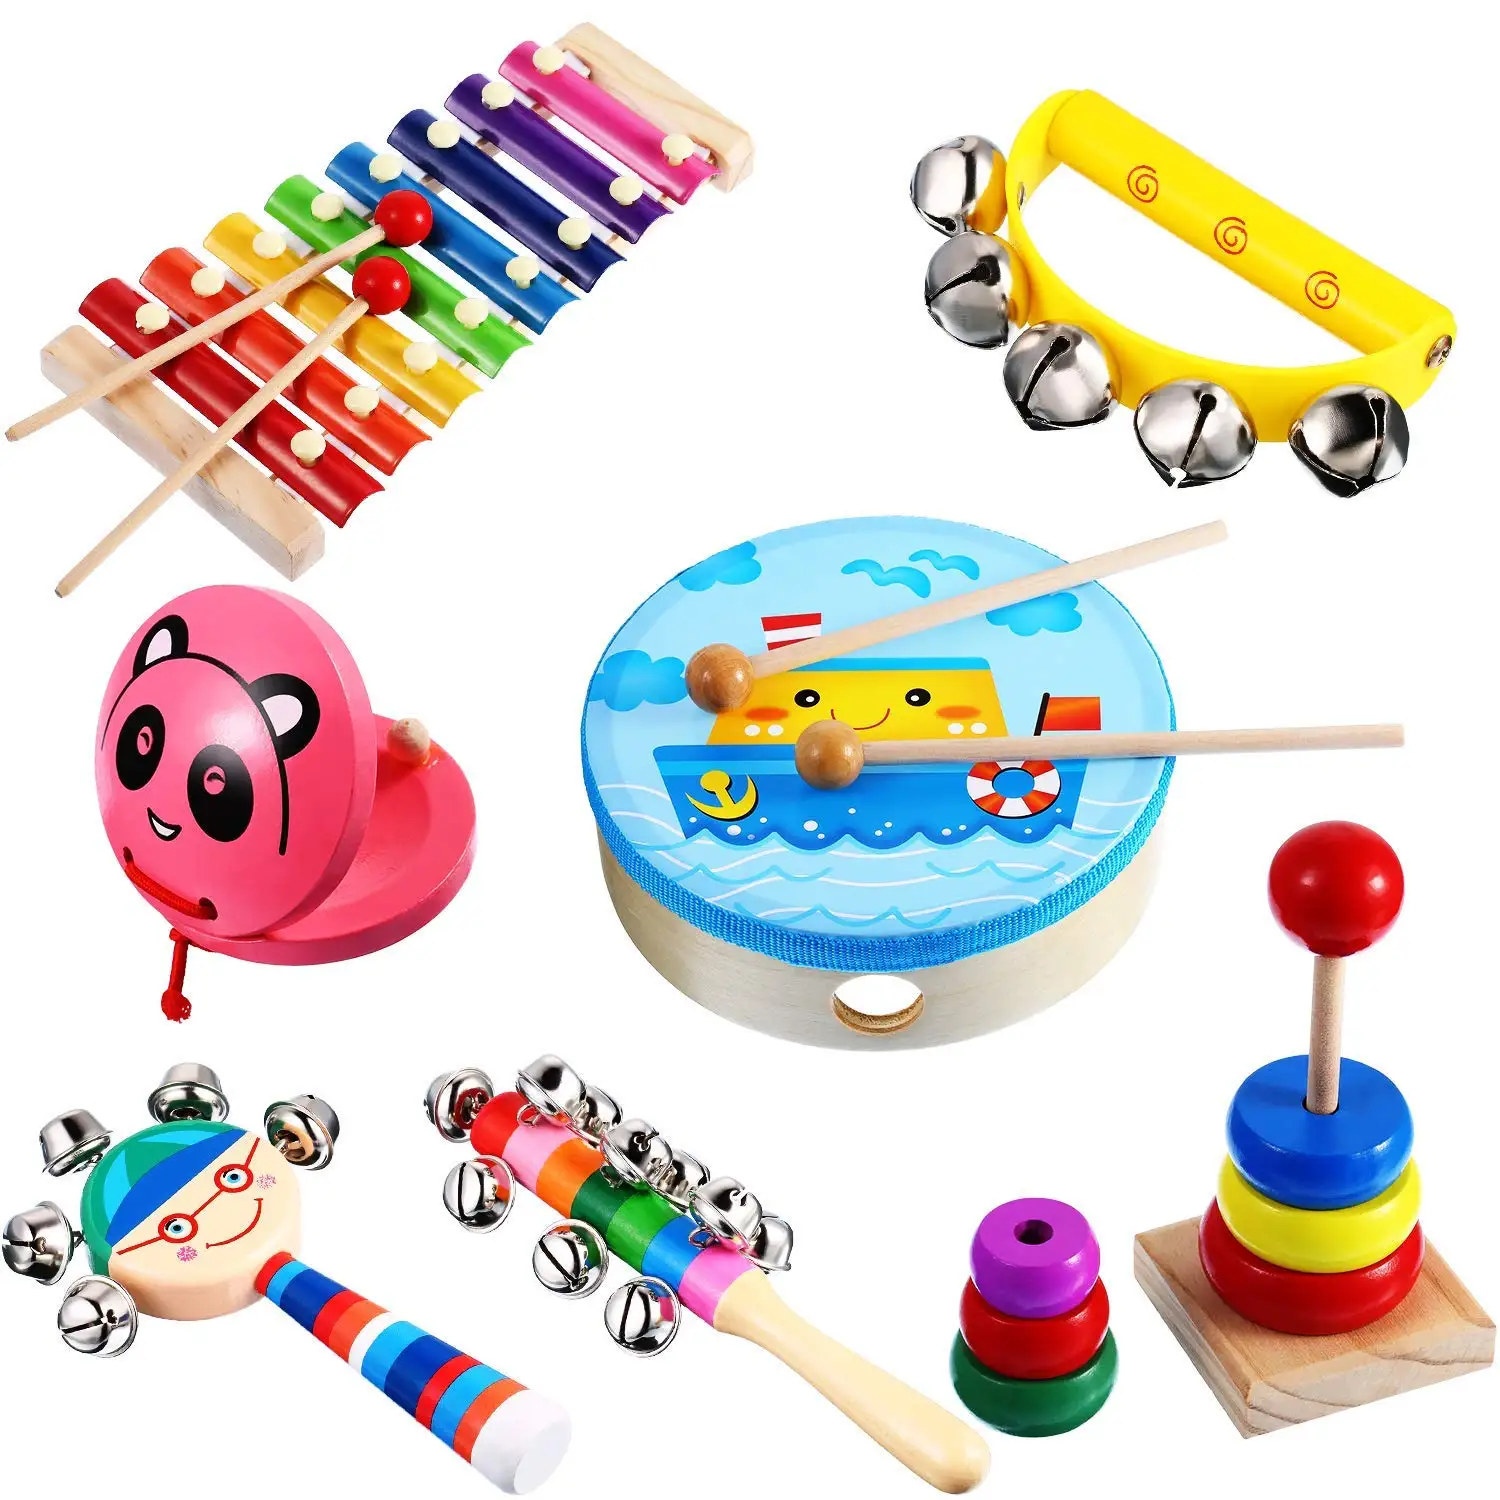 Buy LuaLua Toddler toys Musical Instruments for 1 2 3 year olds 27 pcs